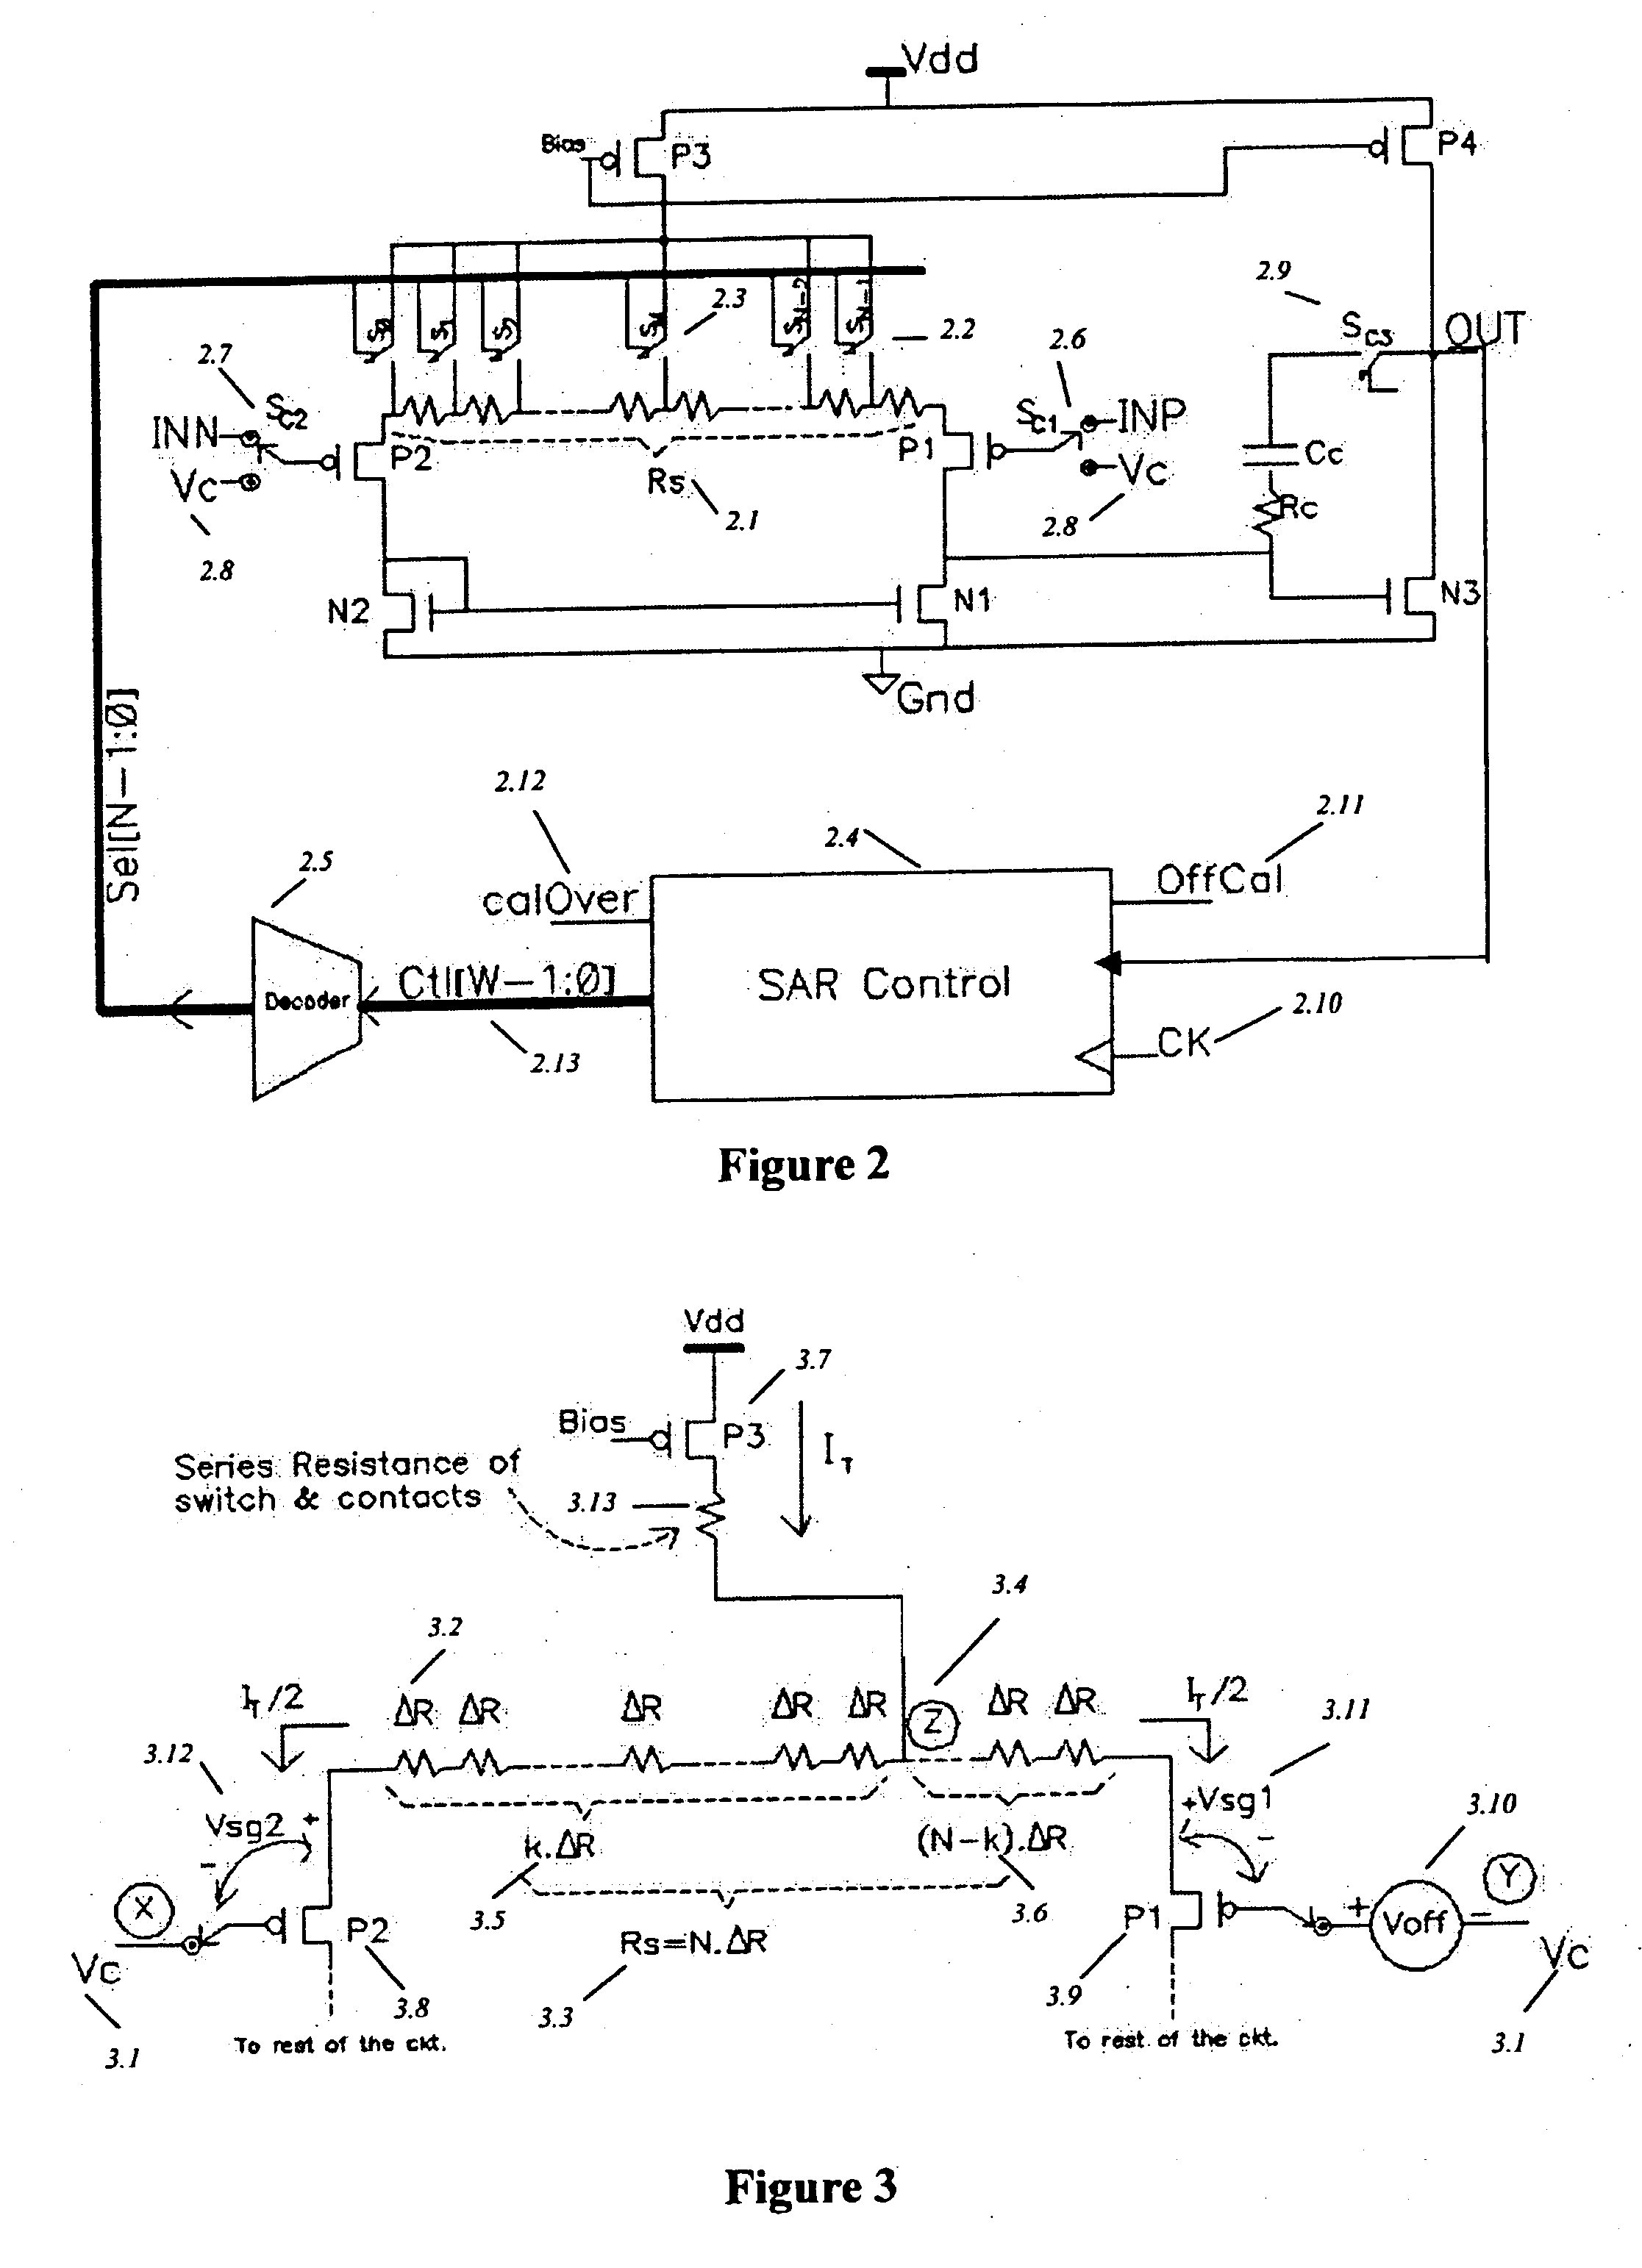 Non-switched capacitor offset voltage compensation in operational amplifiers